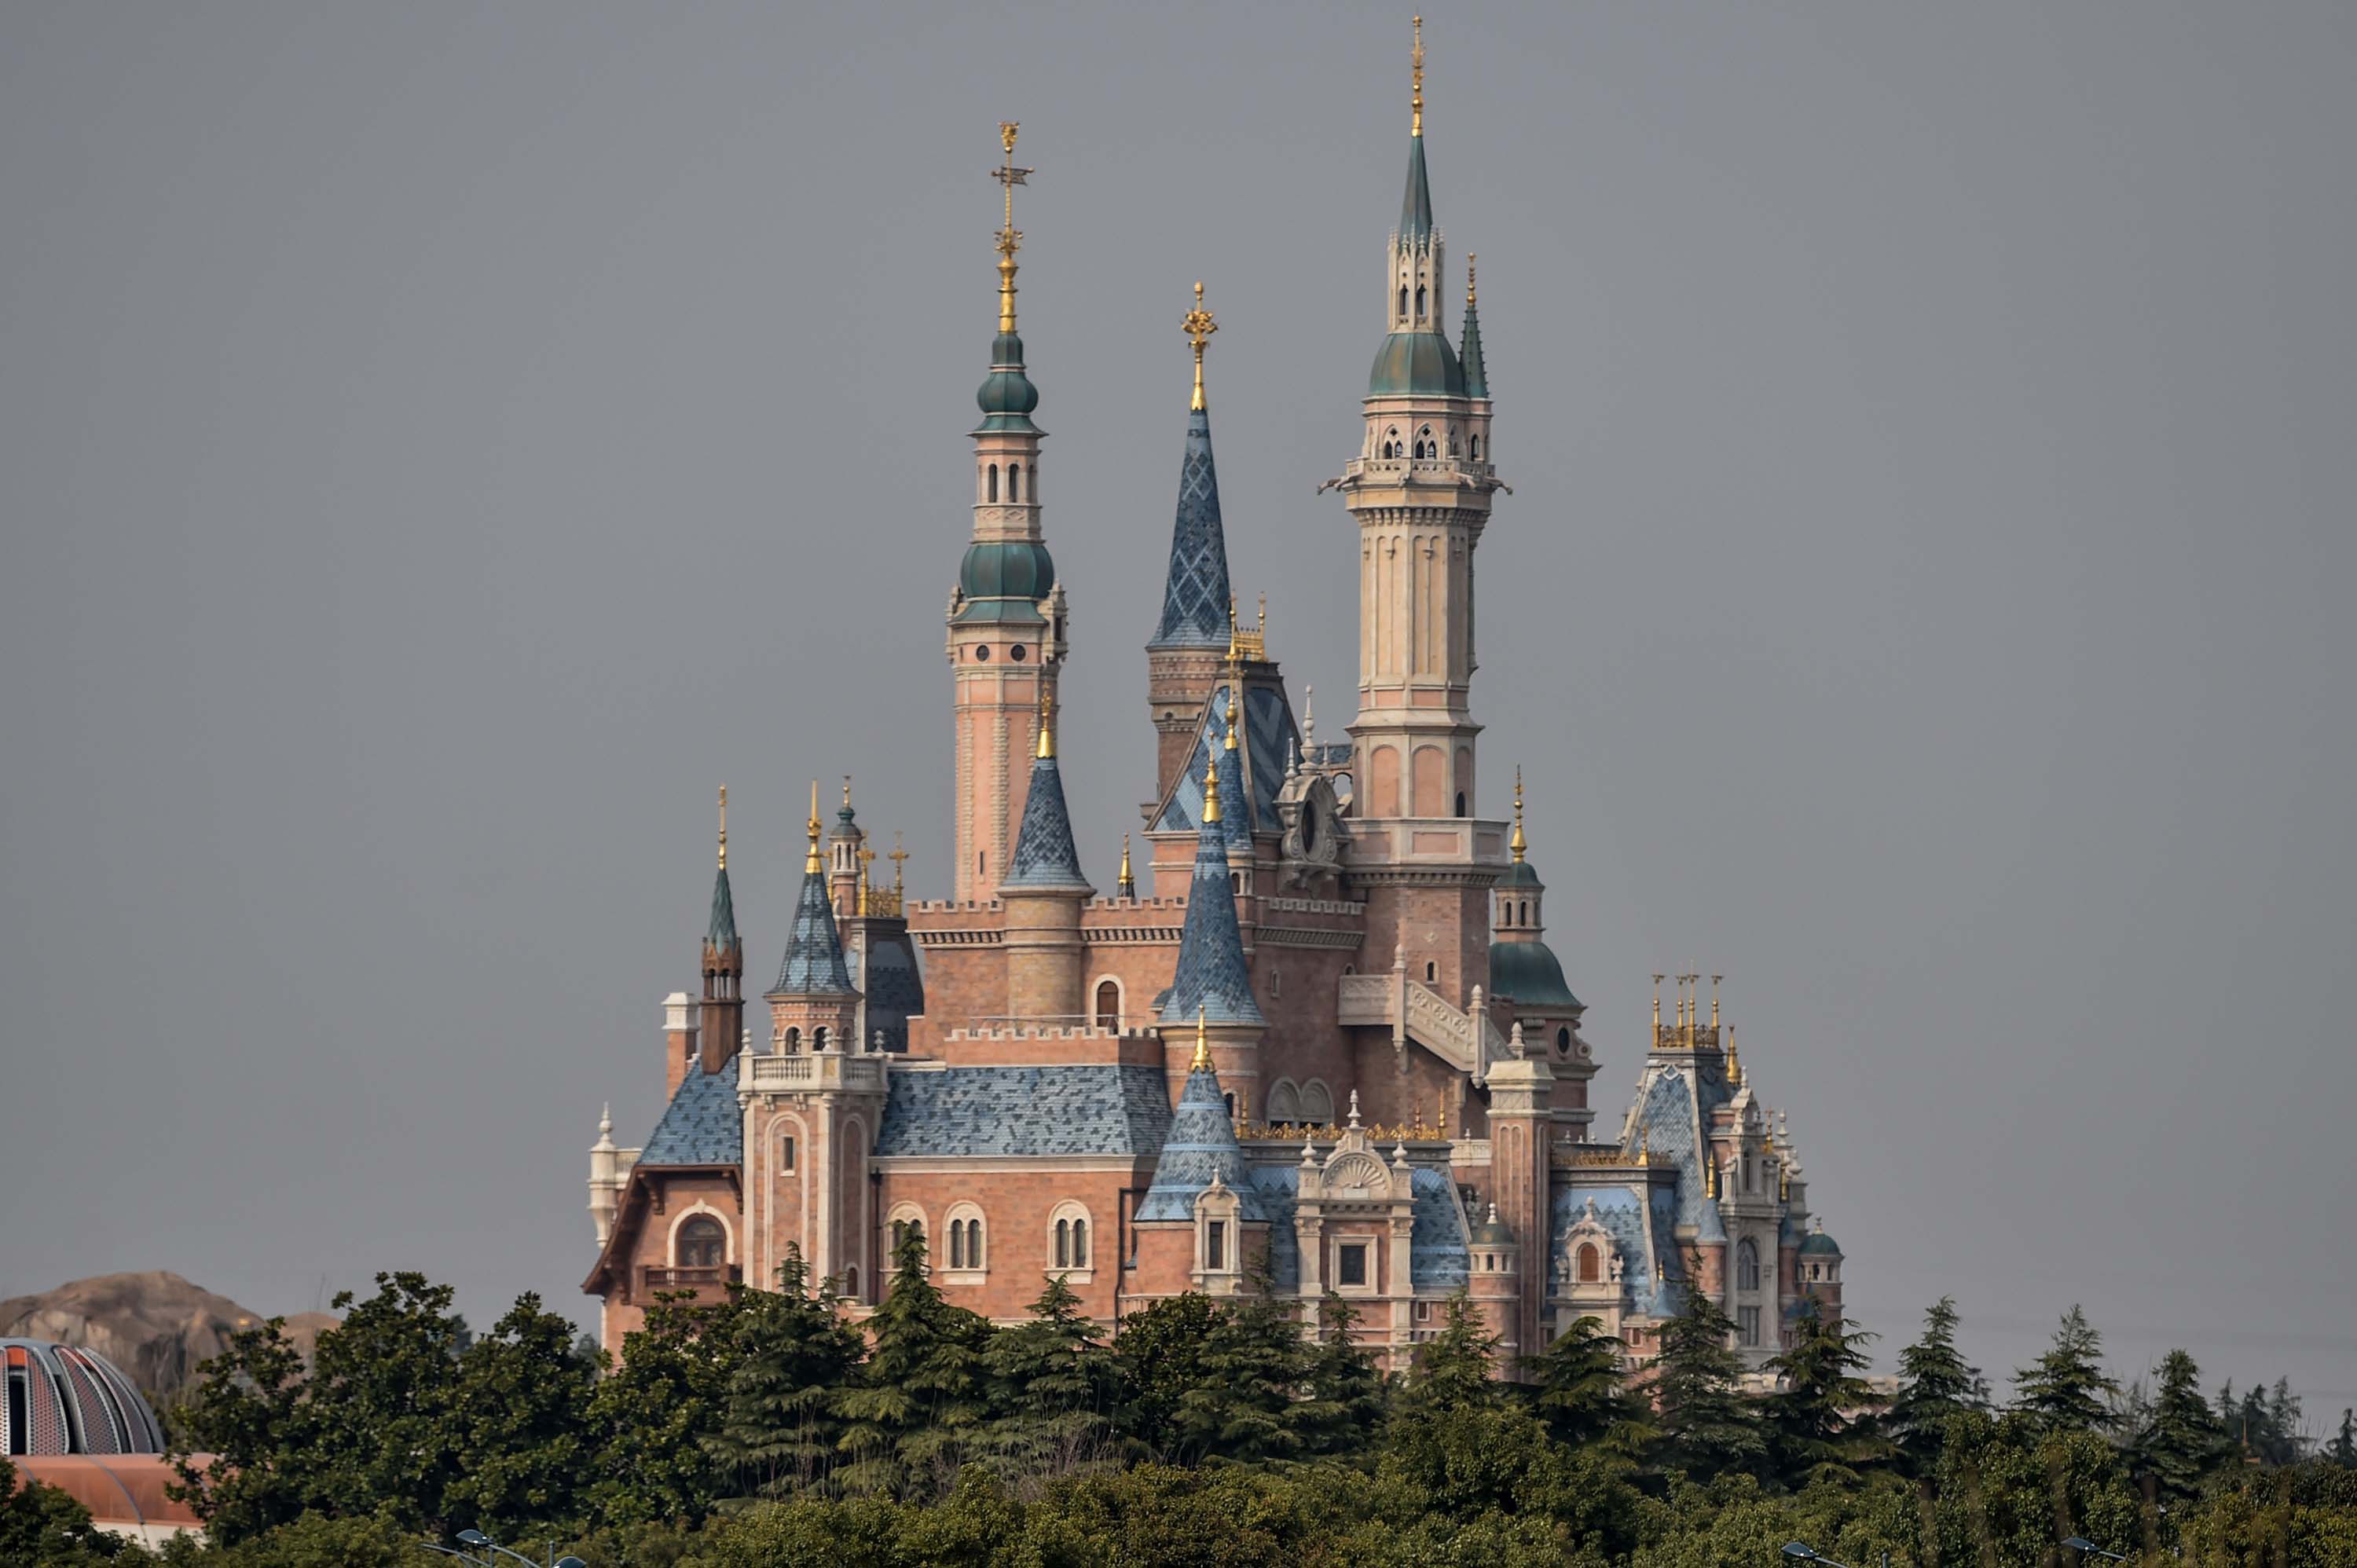 A general view shows the Disney Castle at Disneyland in Shanghai, China, on March 10.